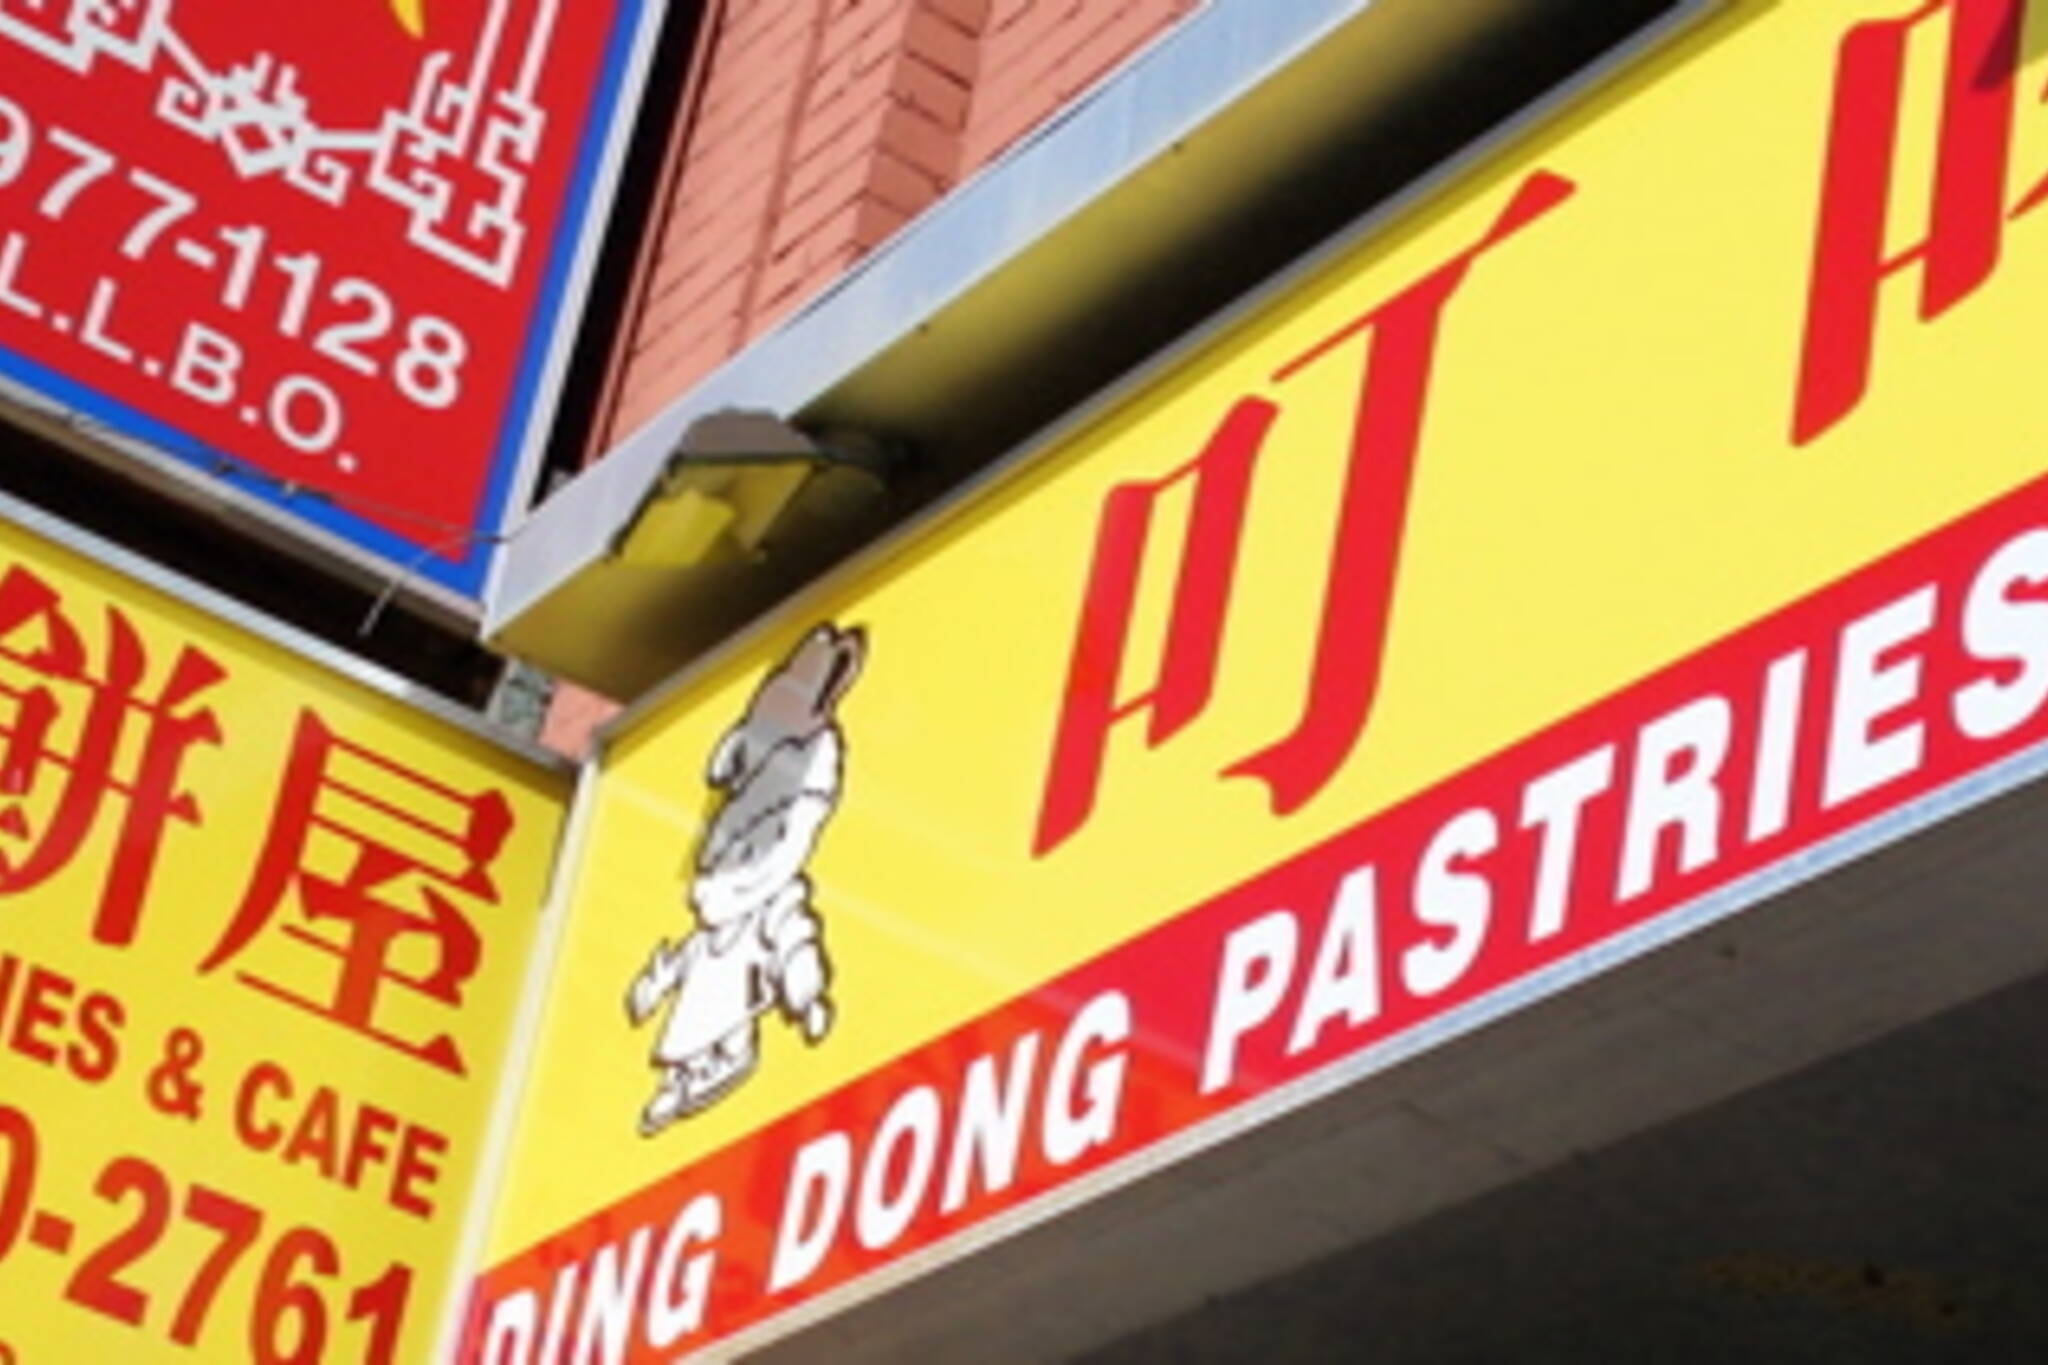 Ding Dong Pastries